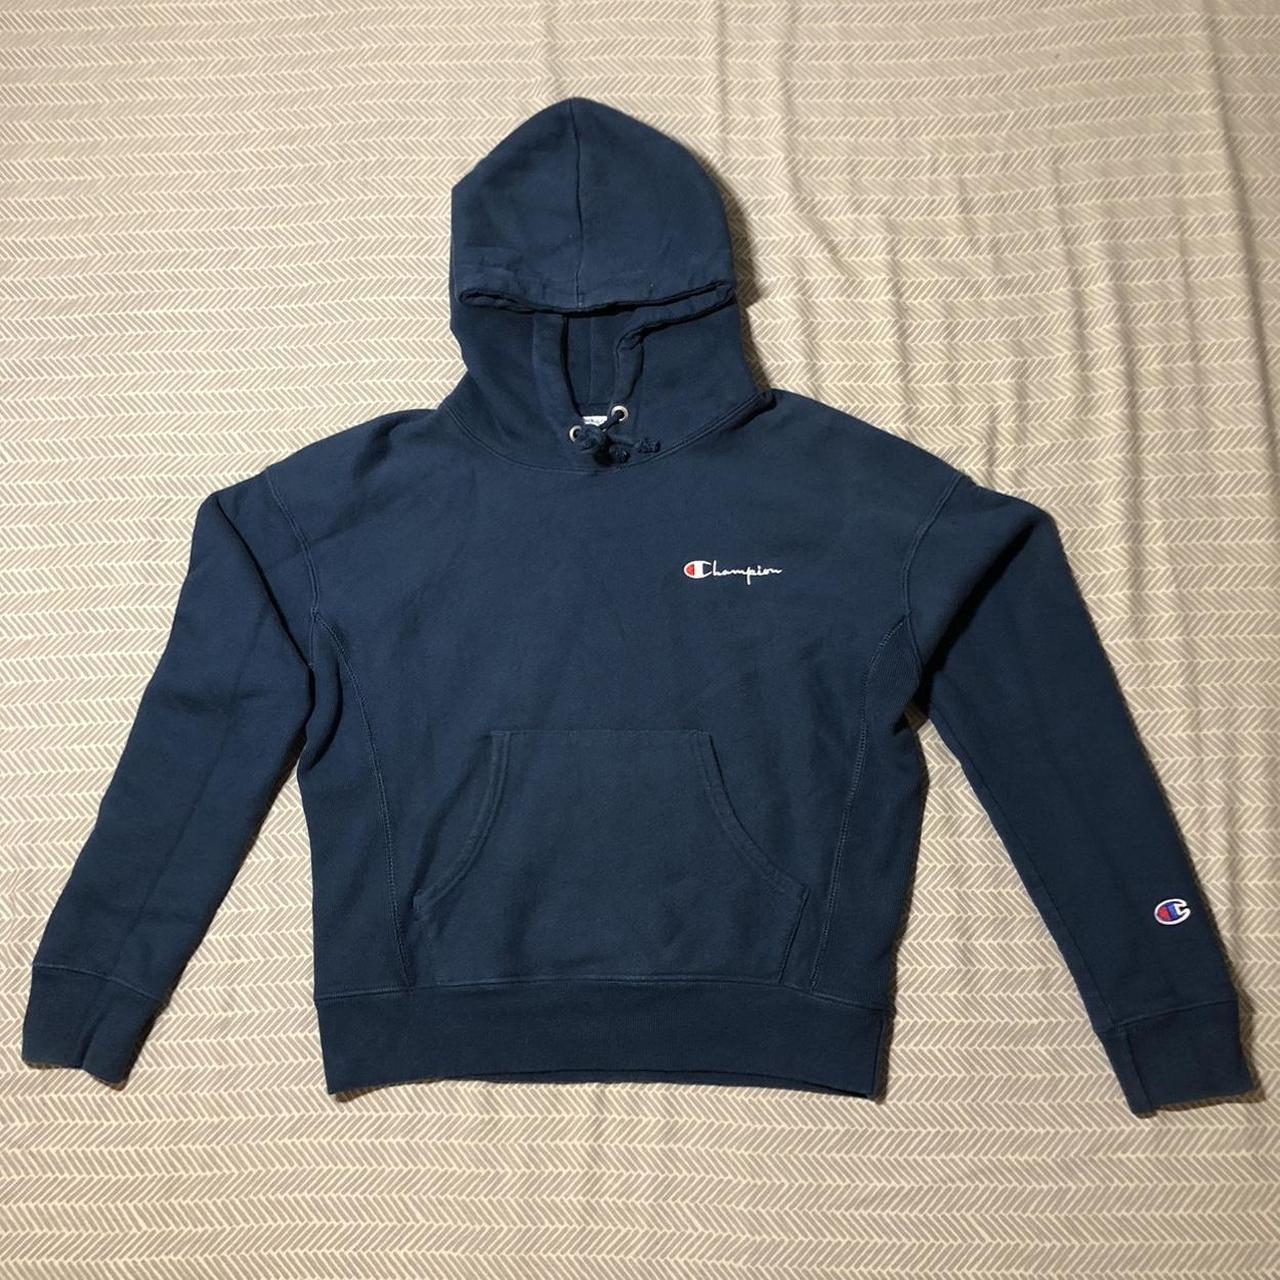 Champion Women's Navy and Blue Hoodie - 1